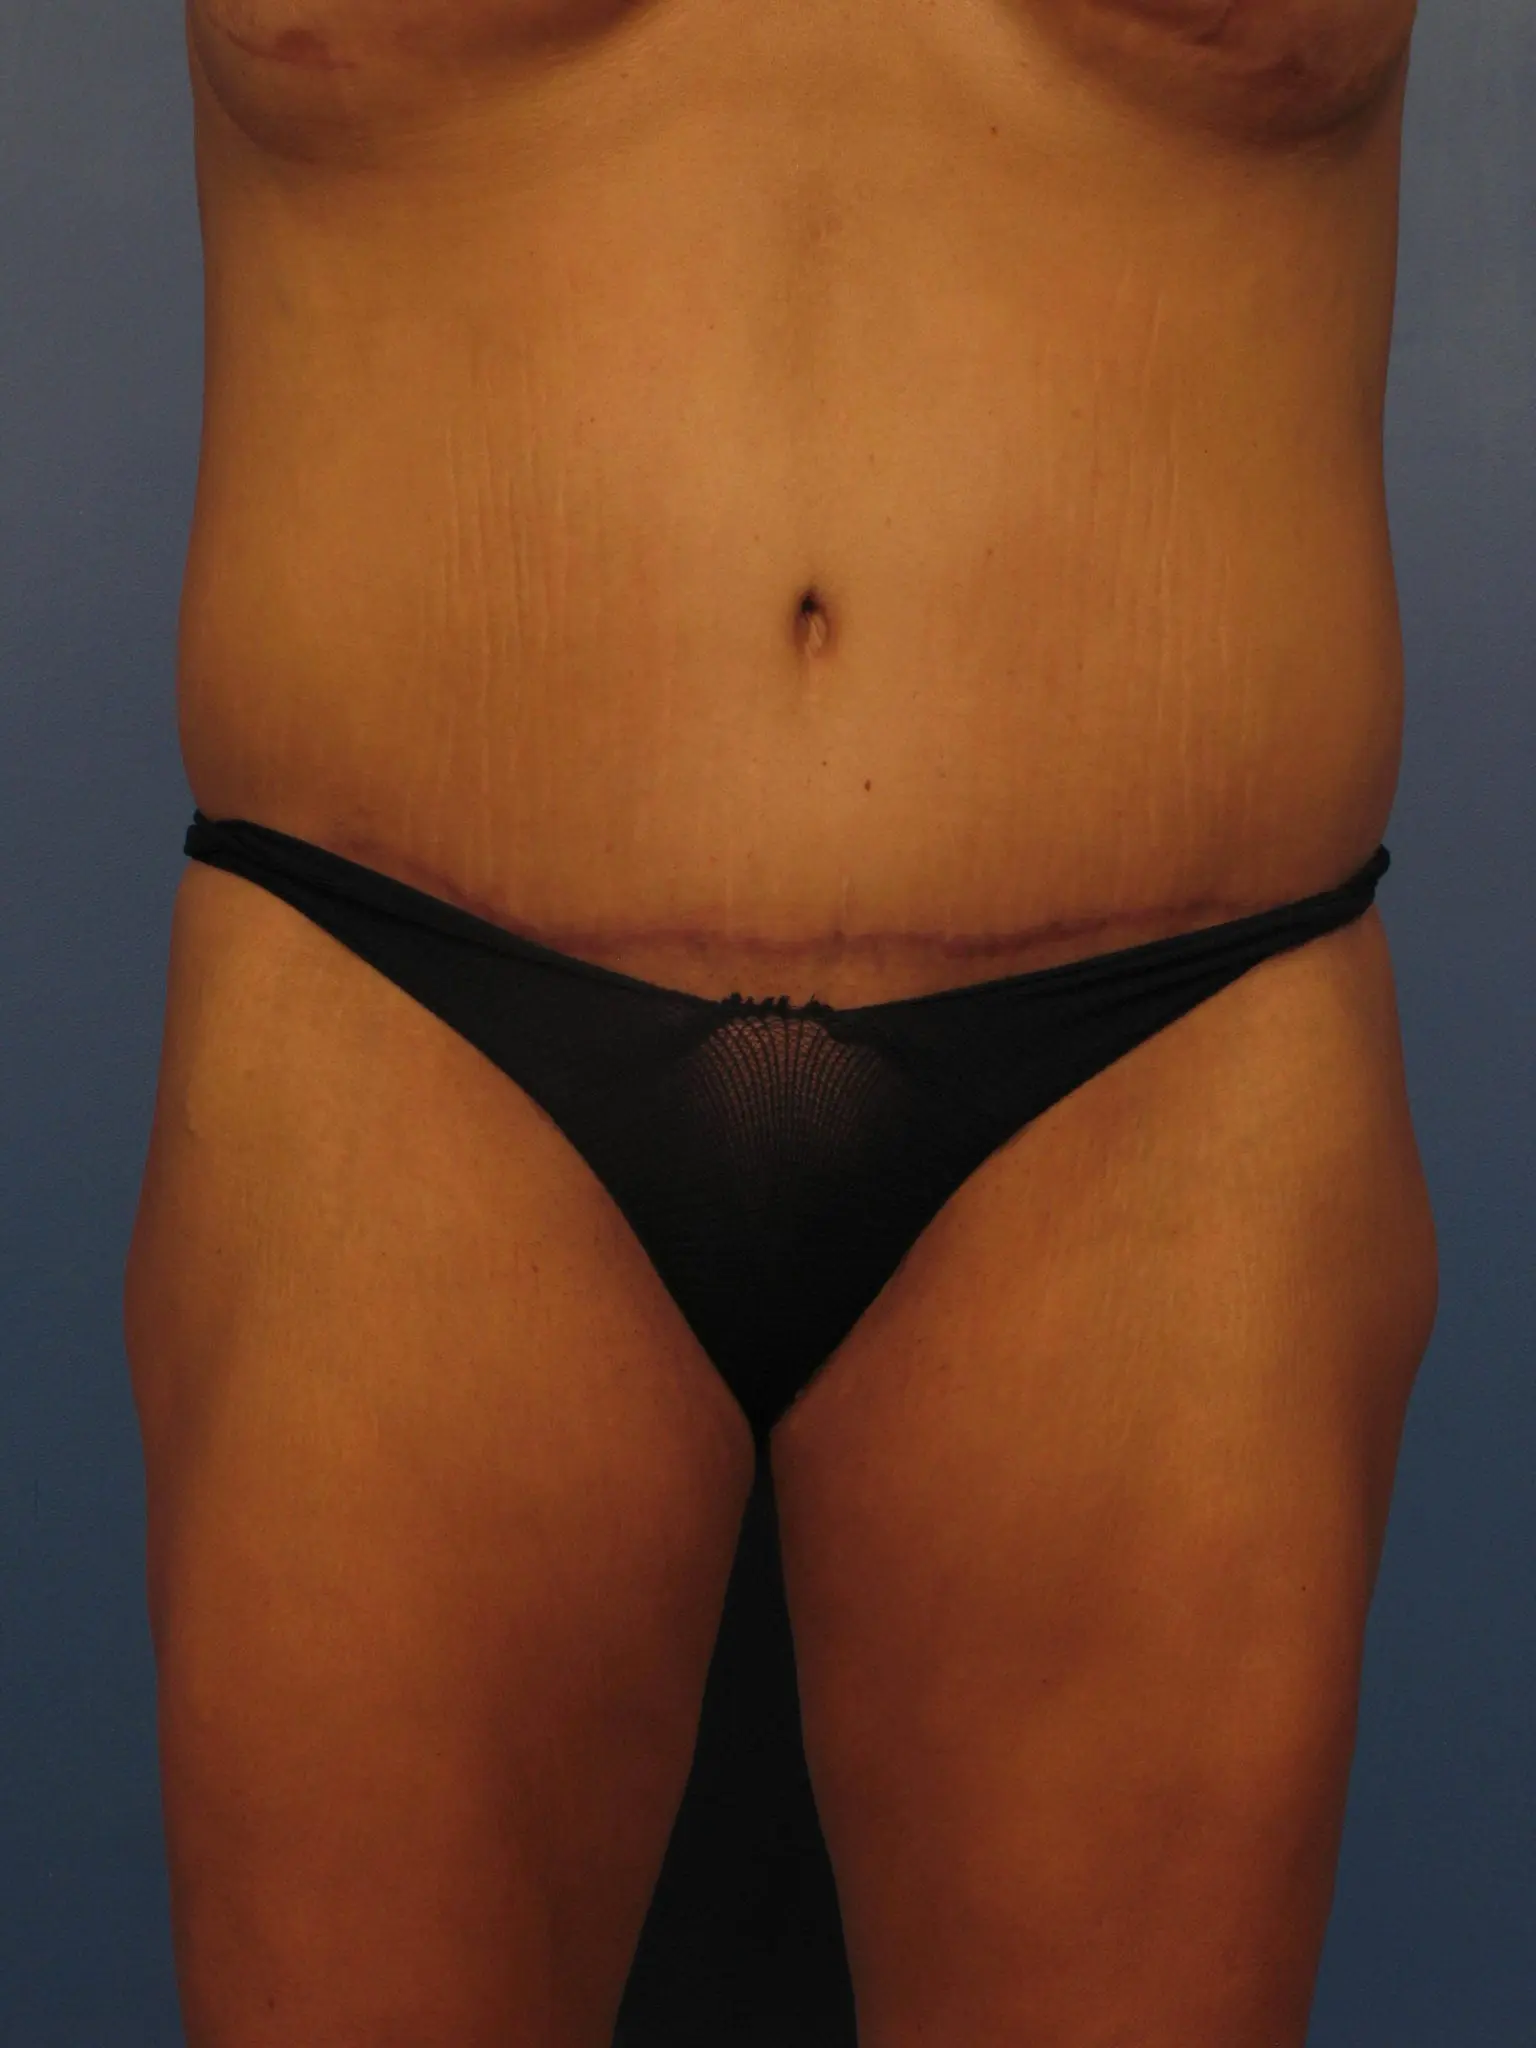 Tummy Tuck Scars Before and After Photo Gallery